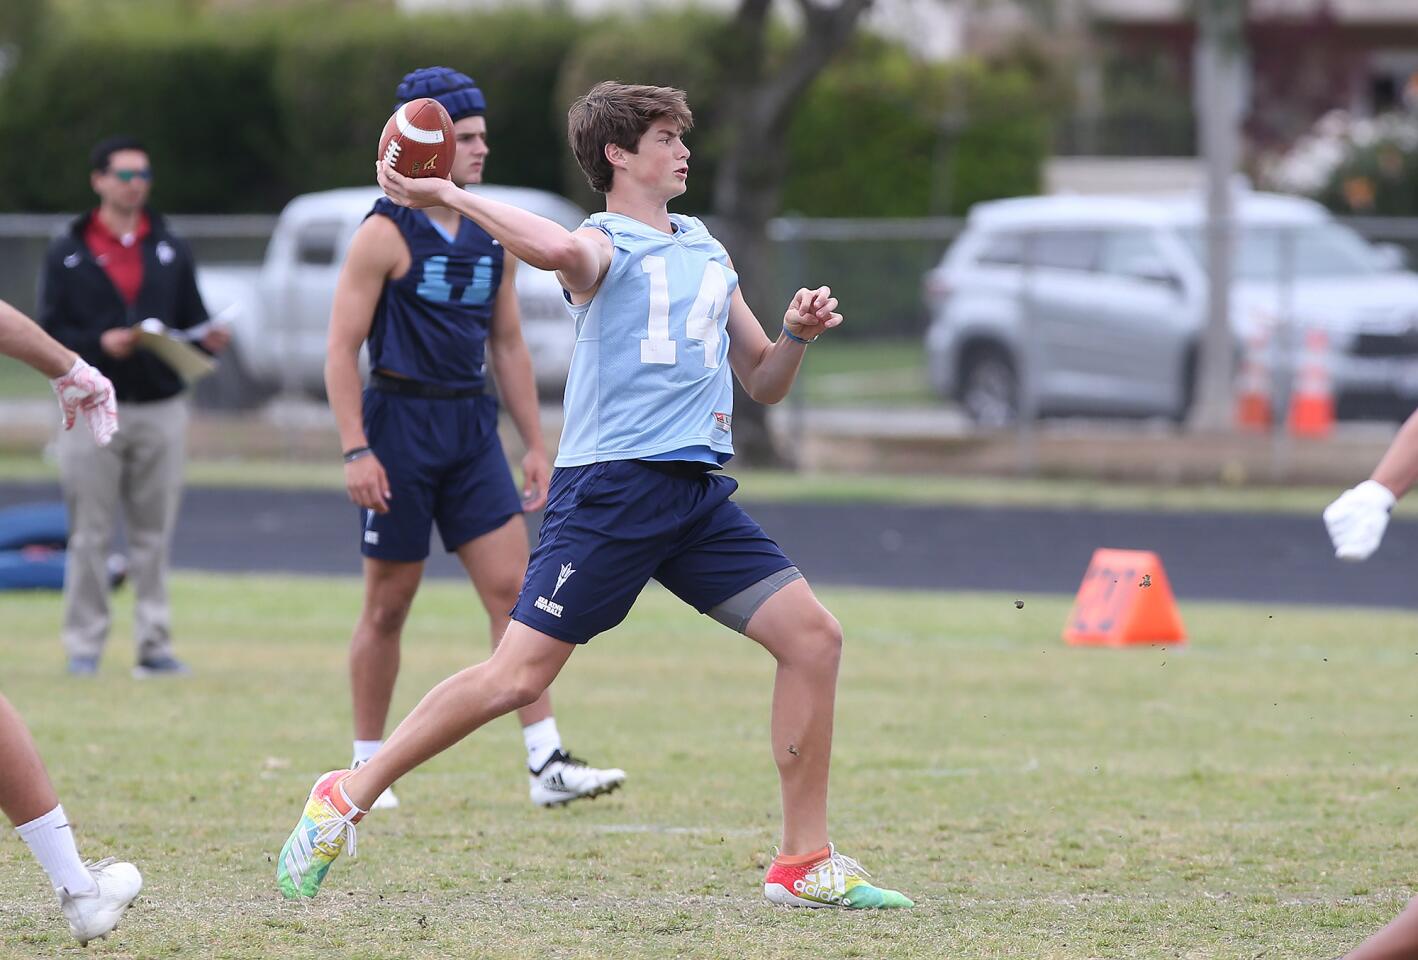 Quarterback Ethan Garbers throws a pass during a spring football showcase at Corona del Mar High on Wednesday.